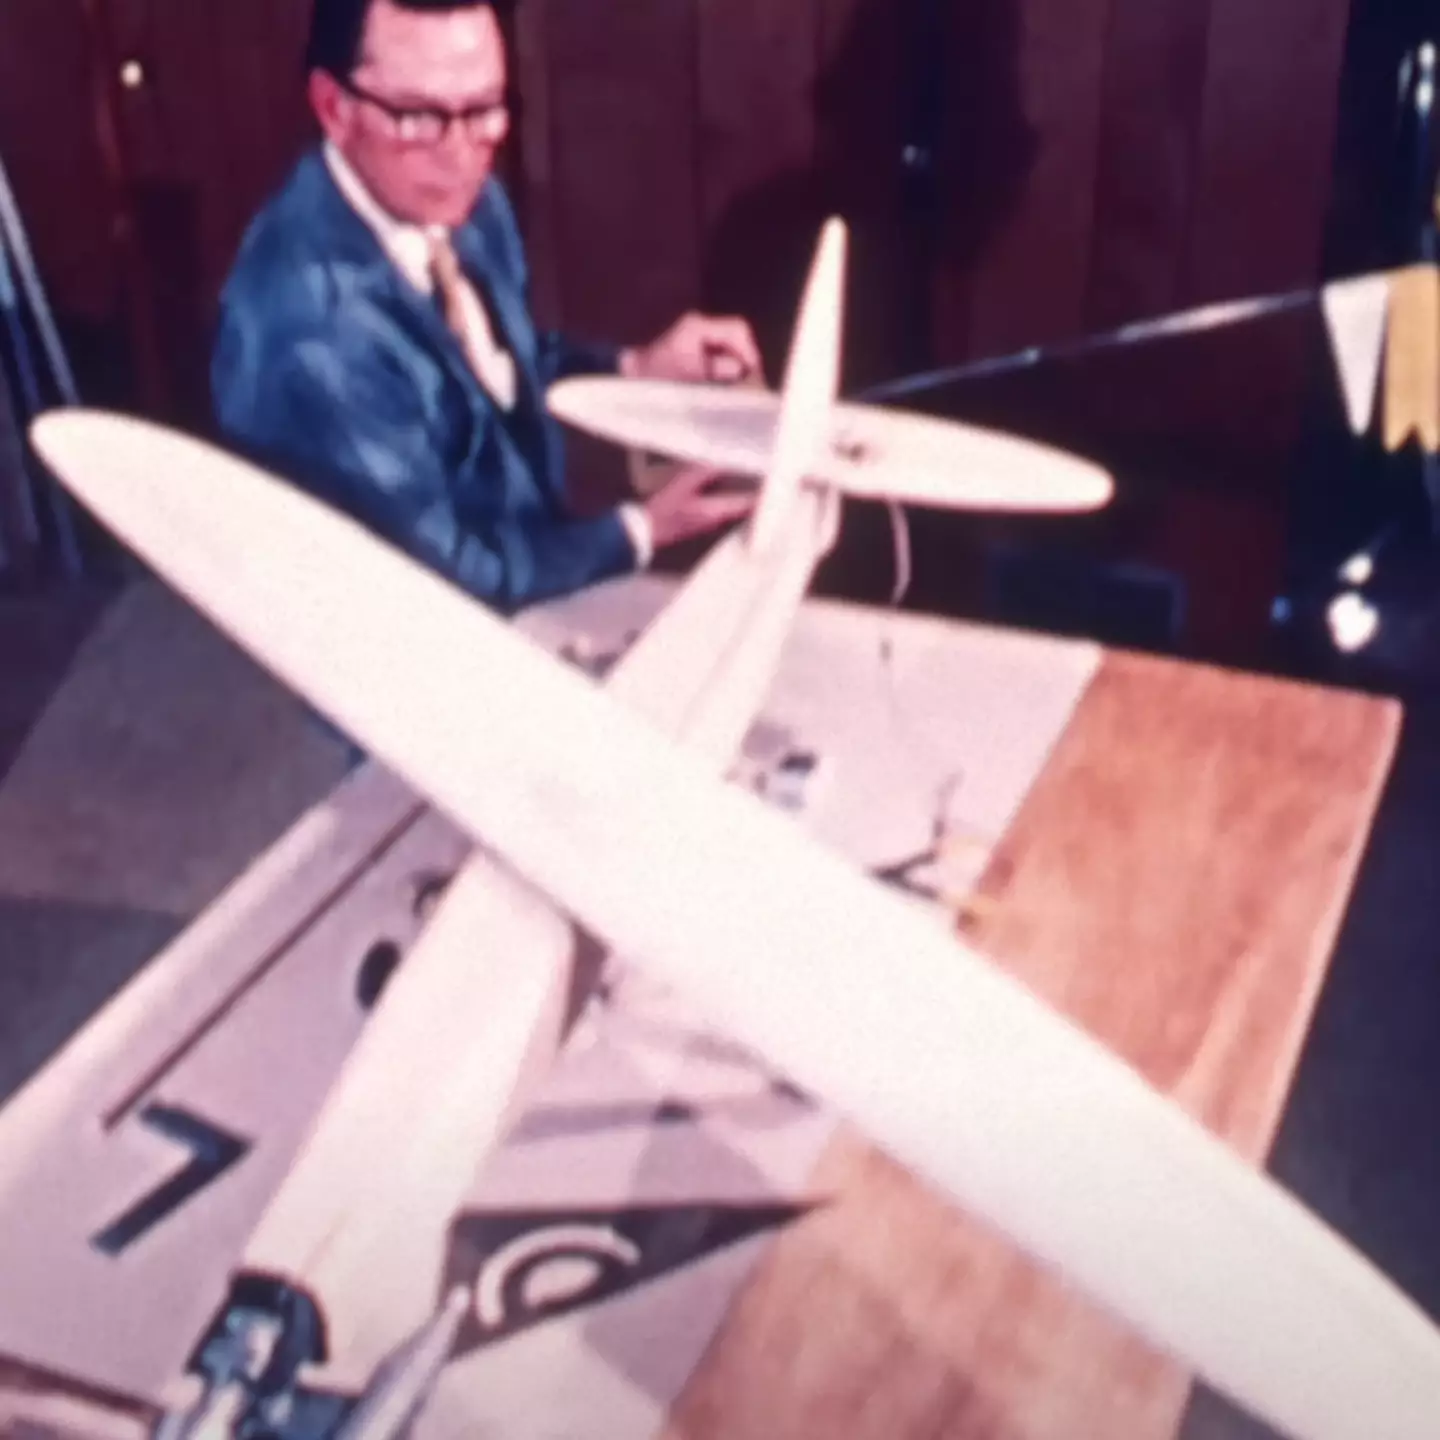 Plans were made for ‘wonky wing’ supersonic plane that ‘defied nature’